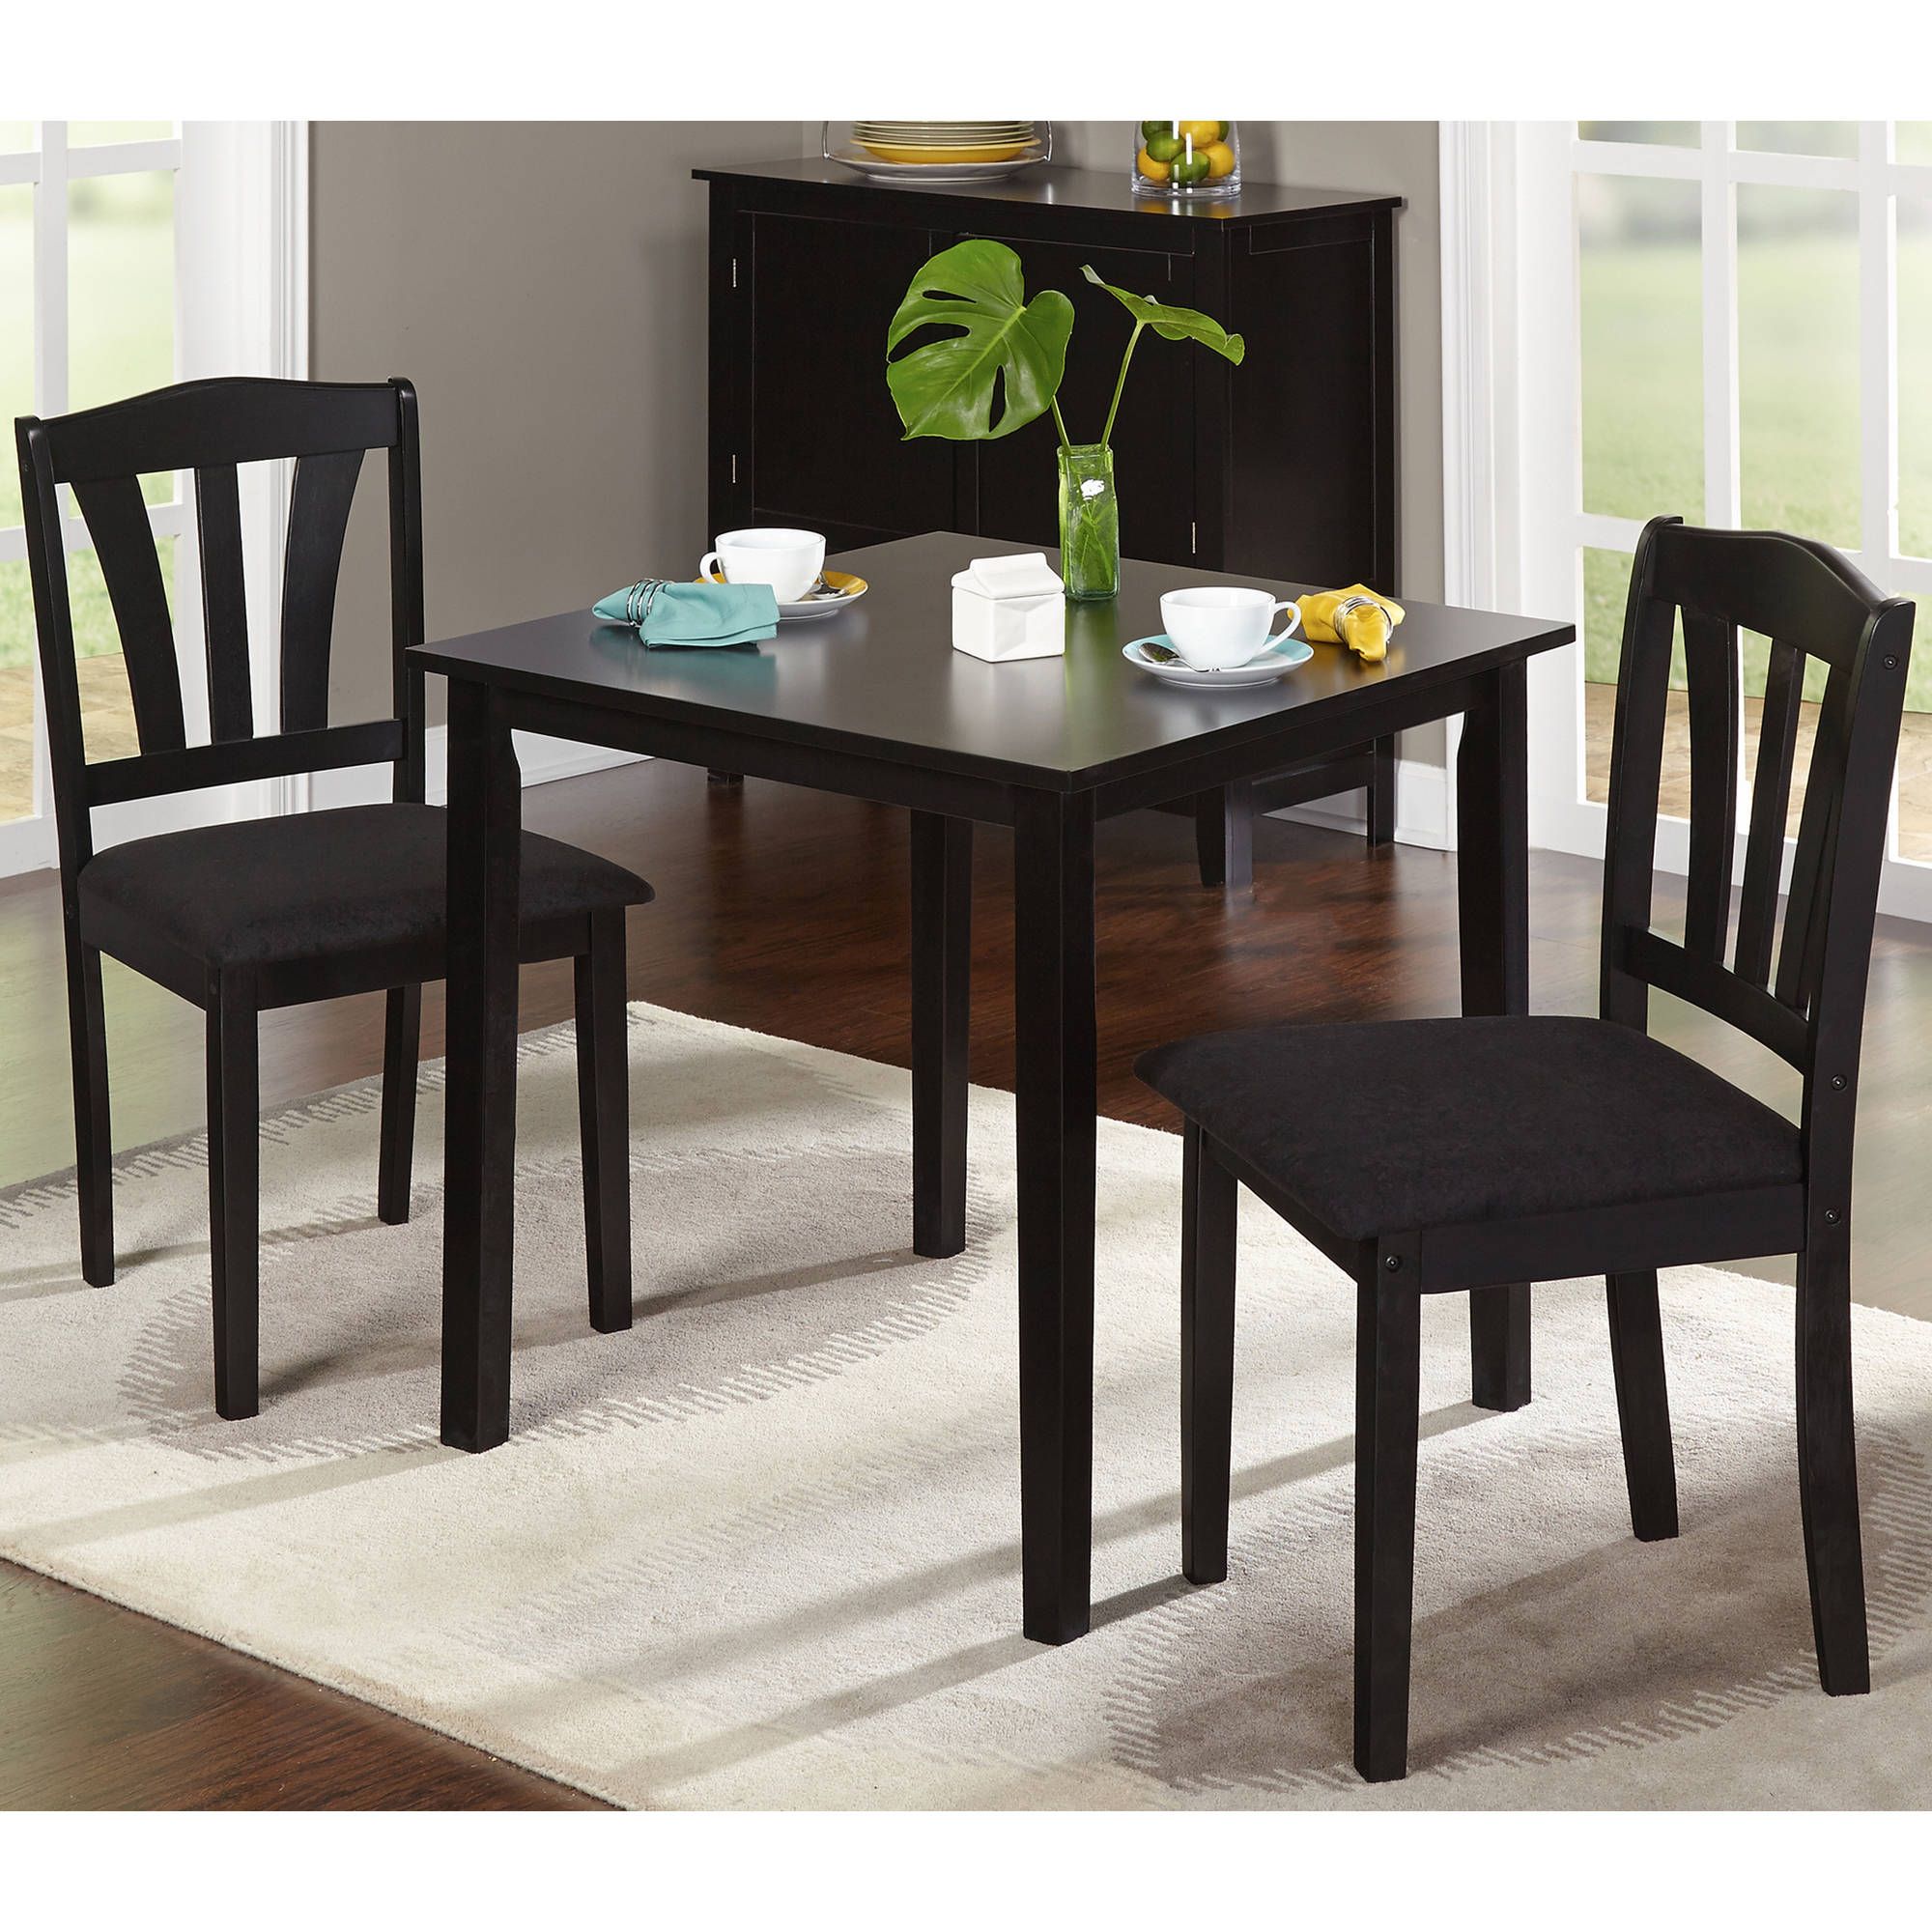 3 Piece Dining Sets Within Most Recently Released Metropolitan 3 Piece Dining Set, Multiple Finishes – Walmart (Photo 1 of 20)